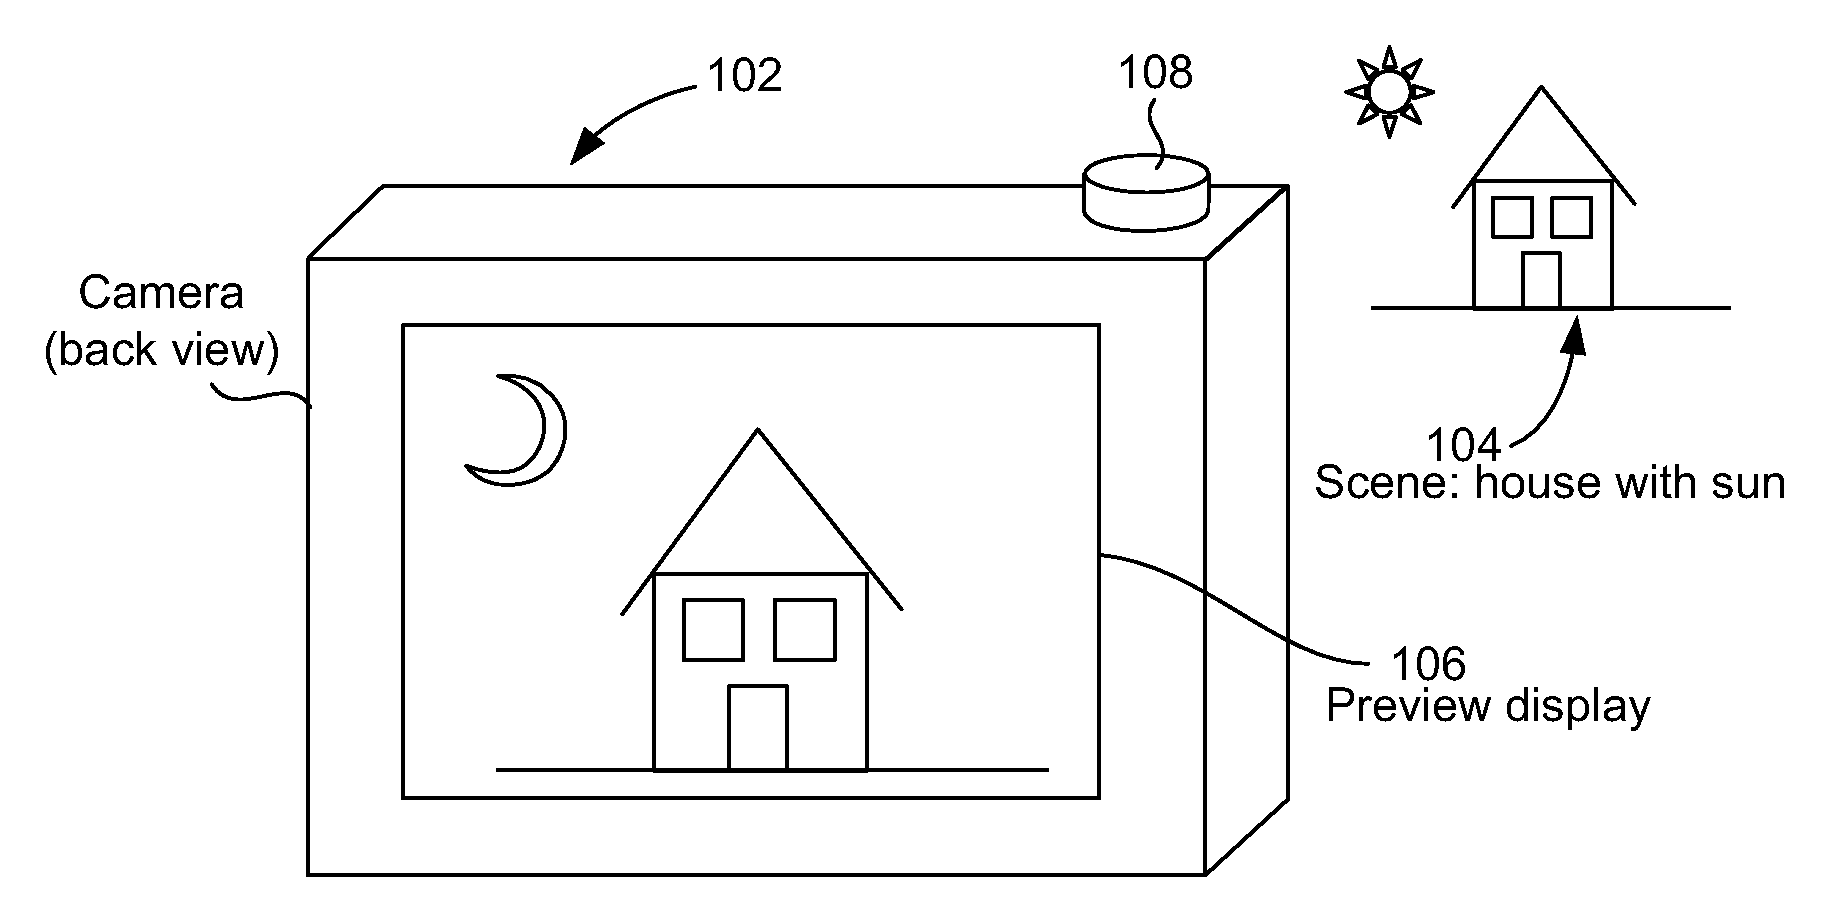 Image capturing device for high-resolution images and extended field-of-view images